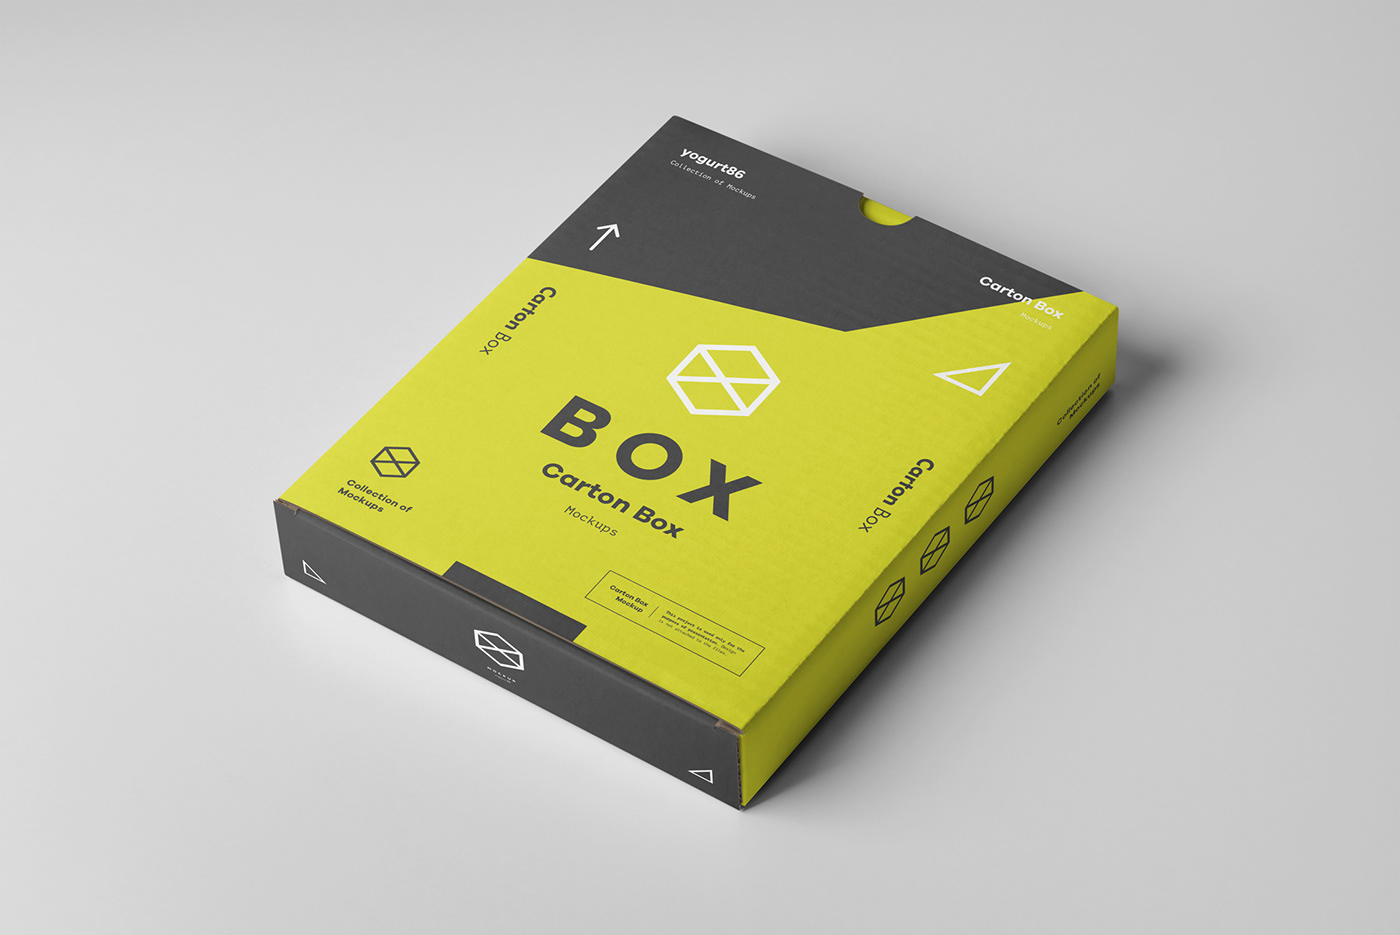 box cartboard device paper eco brown flat Mockup product